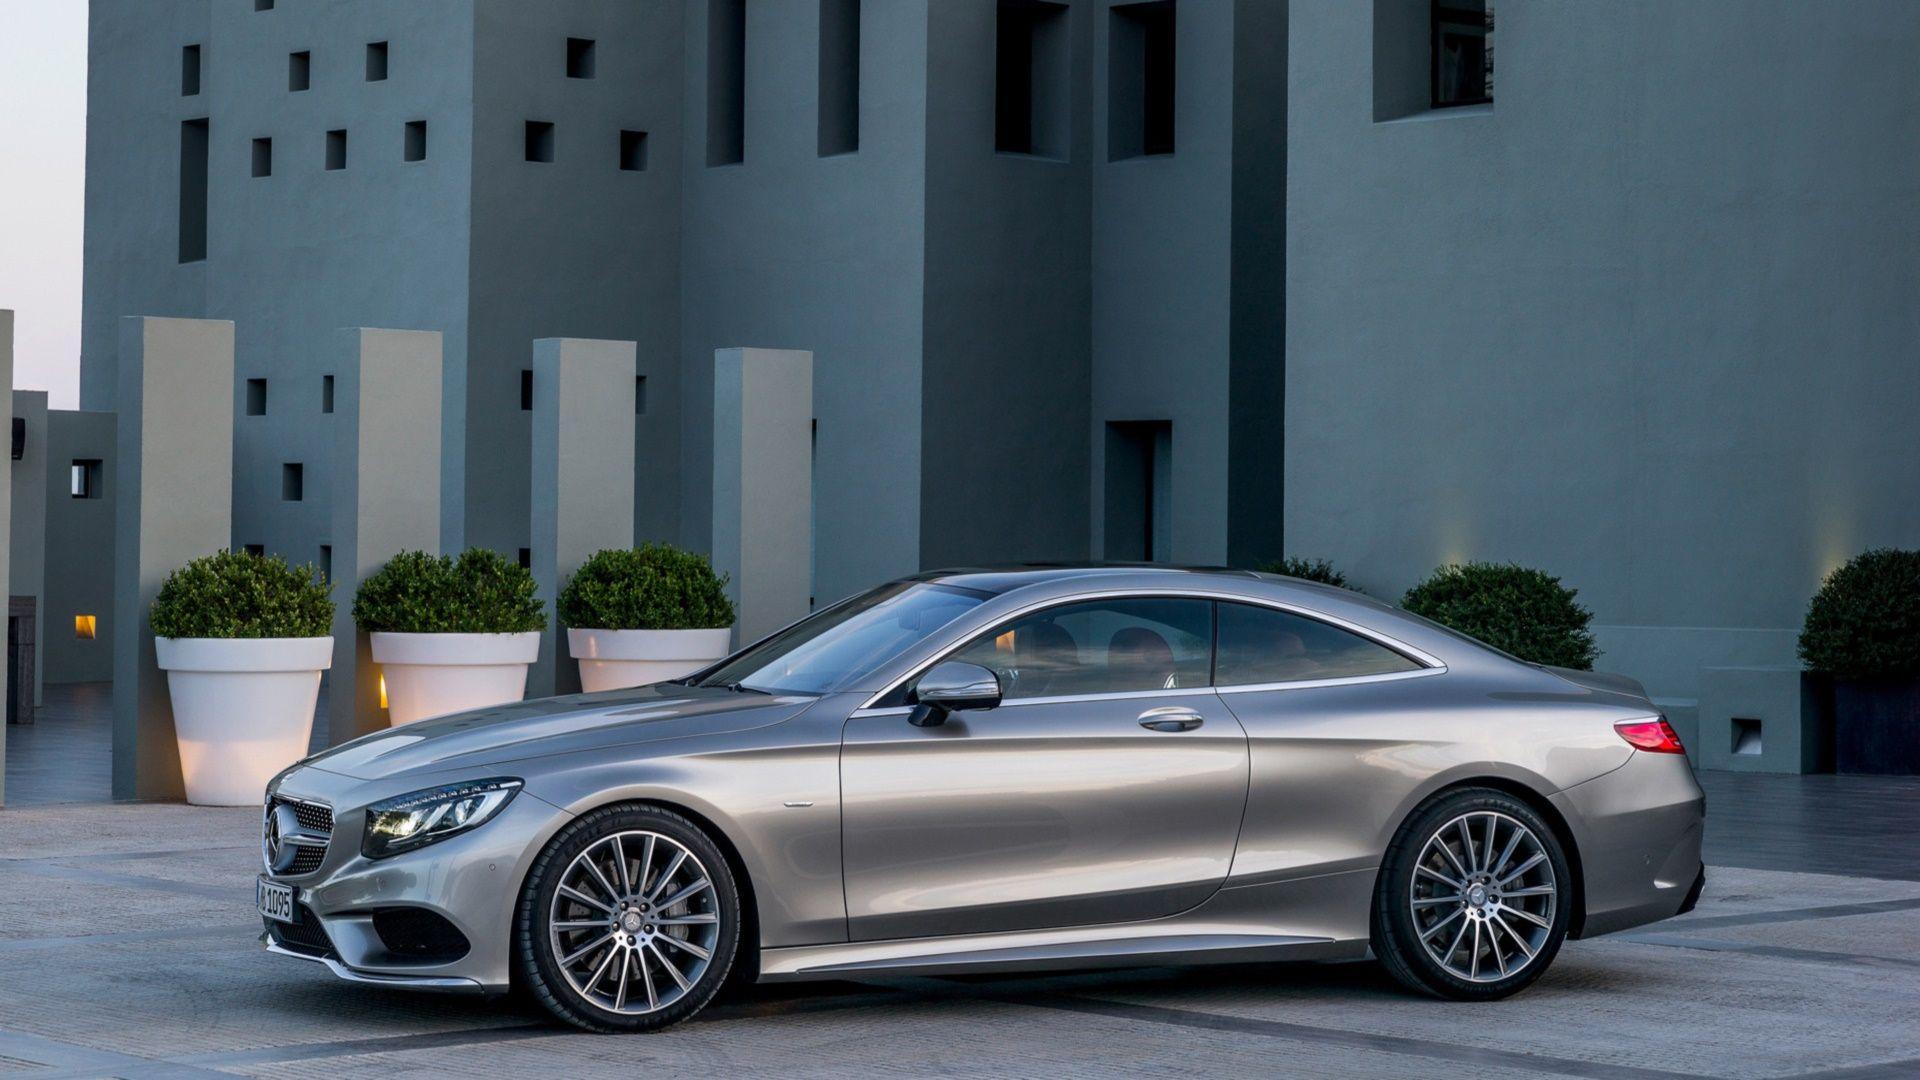 Mercedes Benz S Class Coupe HD Wallpaper. Background Image